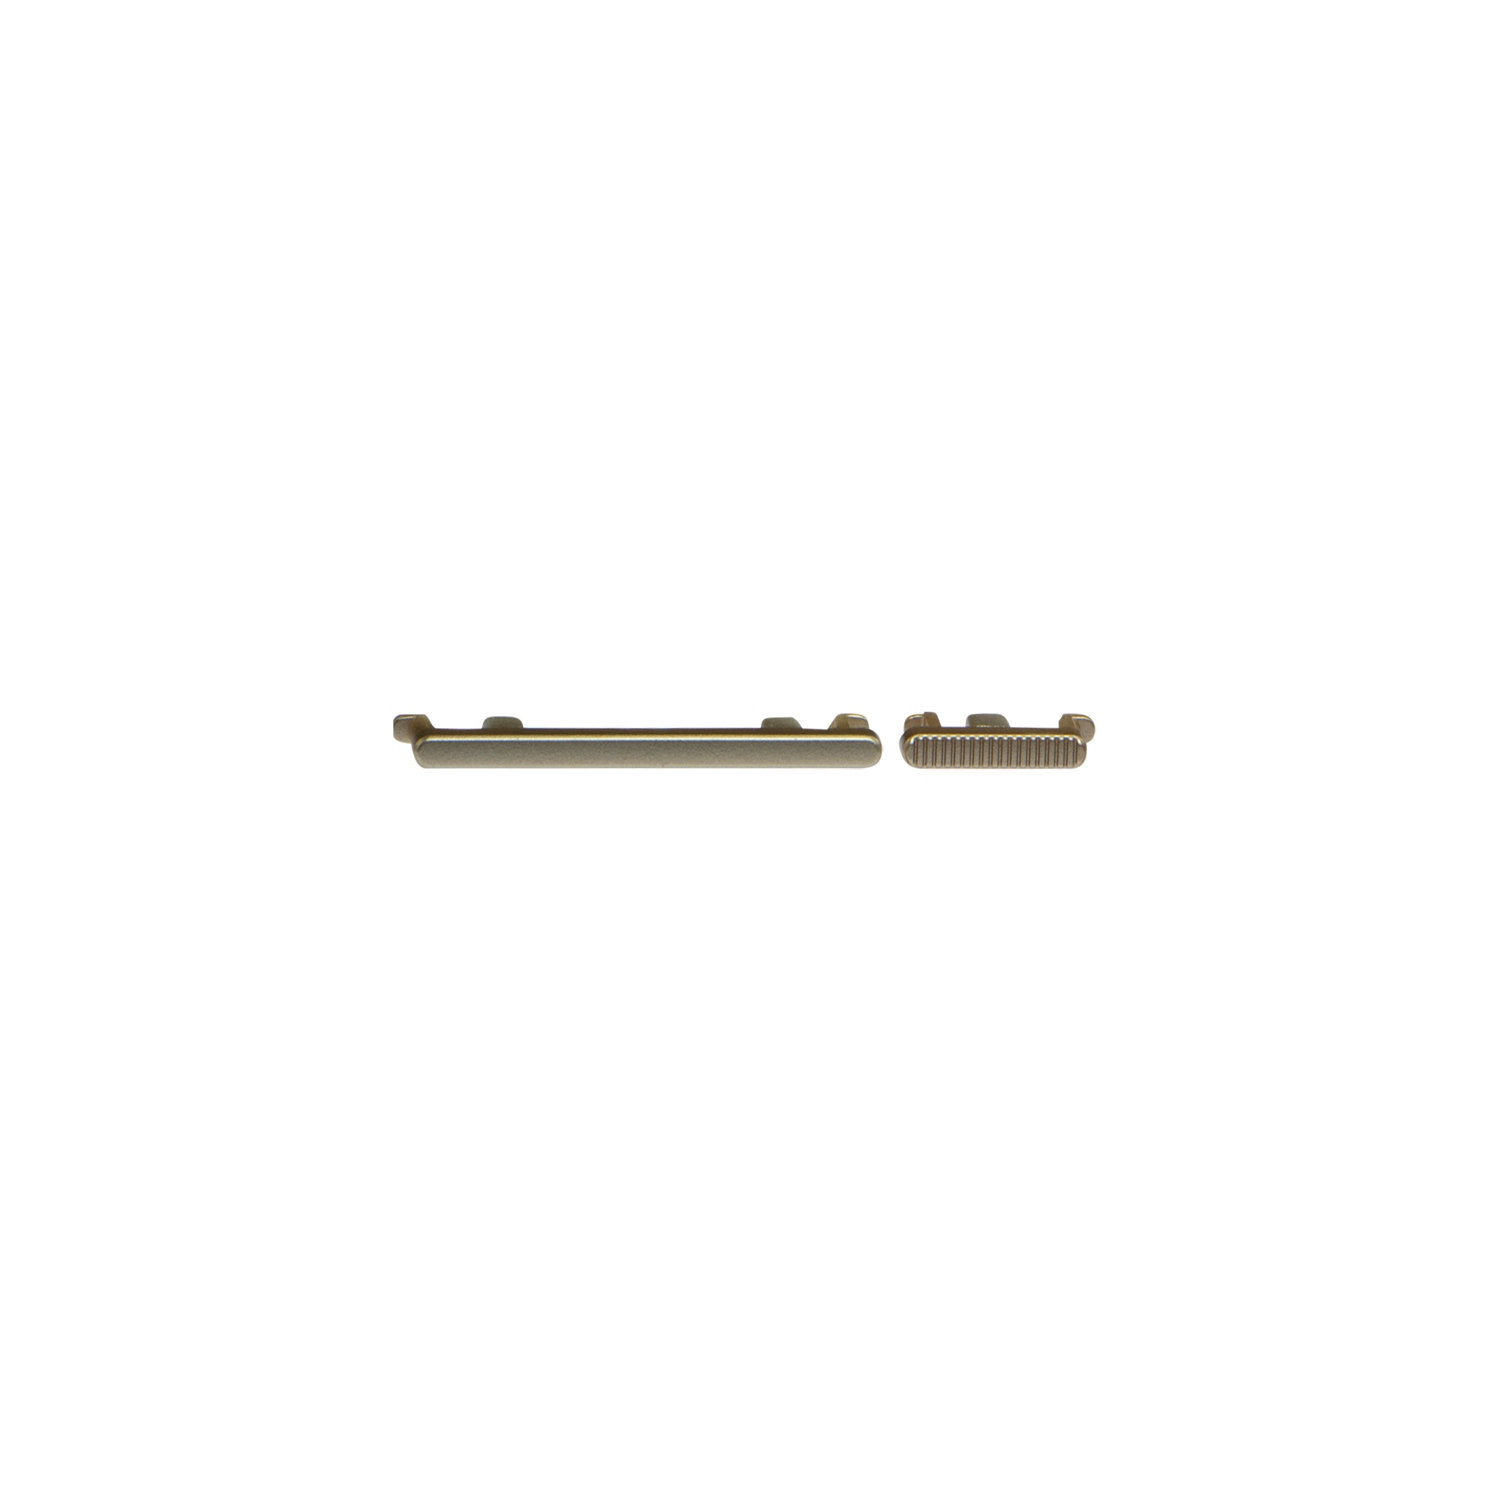 Replacement Power And Volume Buttons Key Parts For Motorola Moto G7 Play - Gold